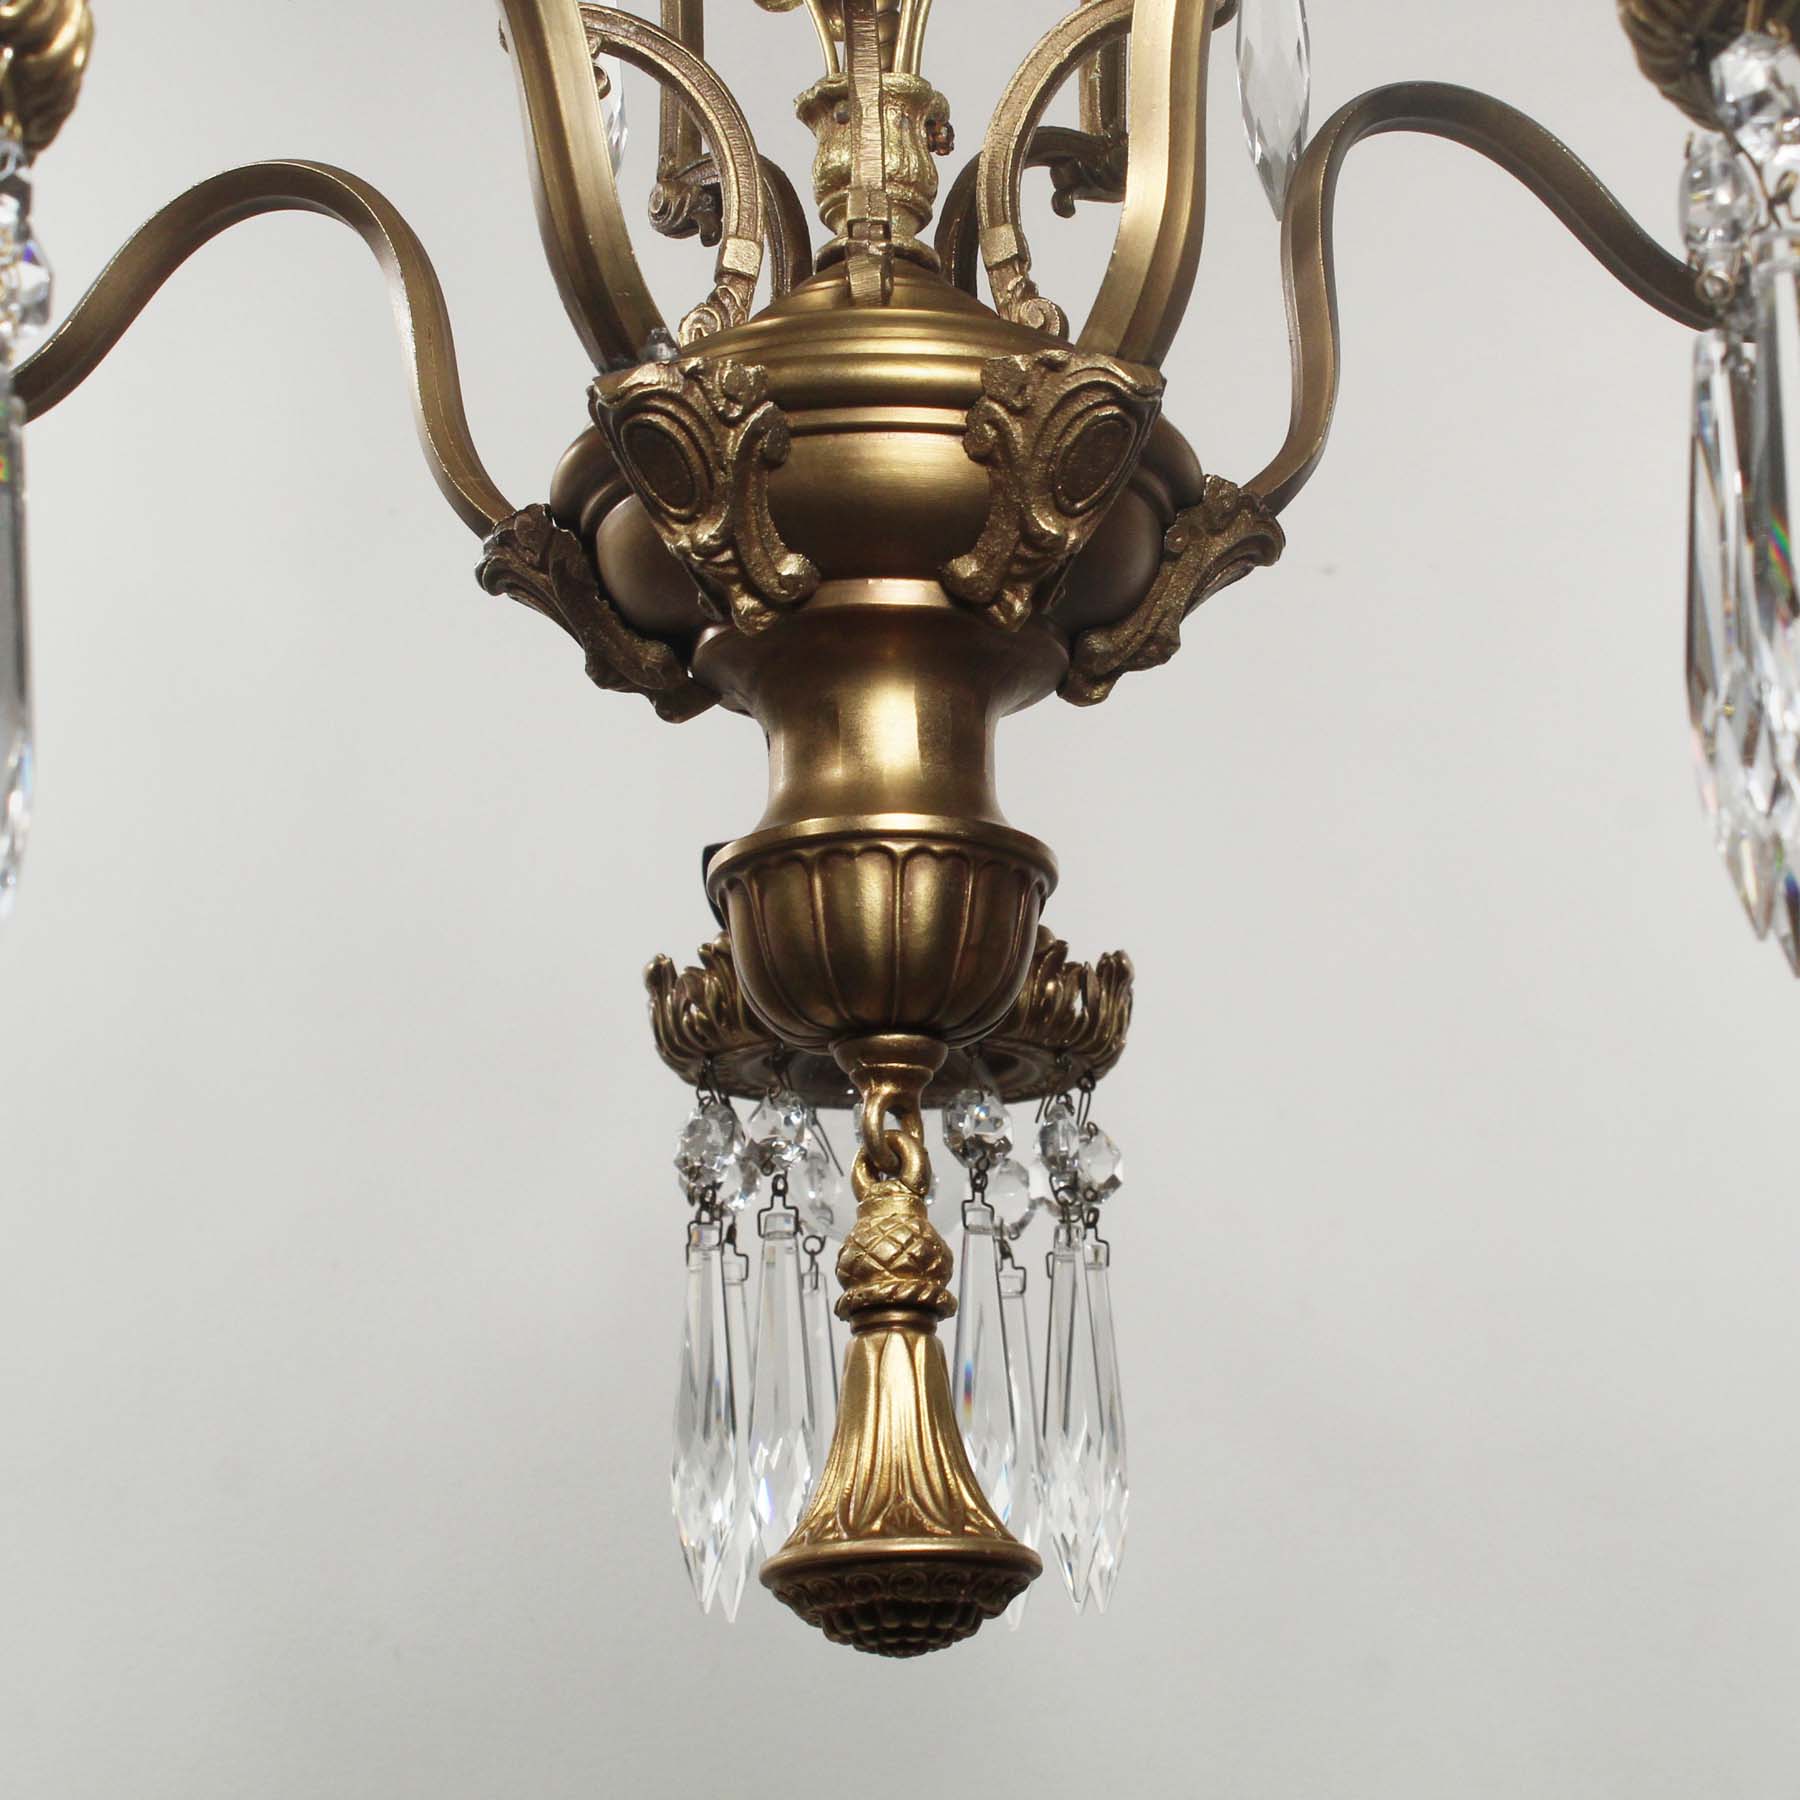 SOLD Neoclassical Chandelier with Prisms, Antique Lighting-67447